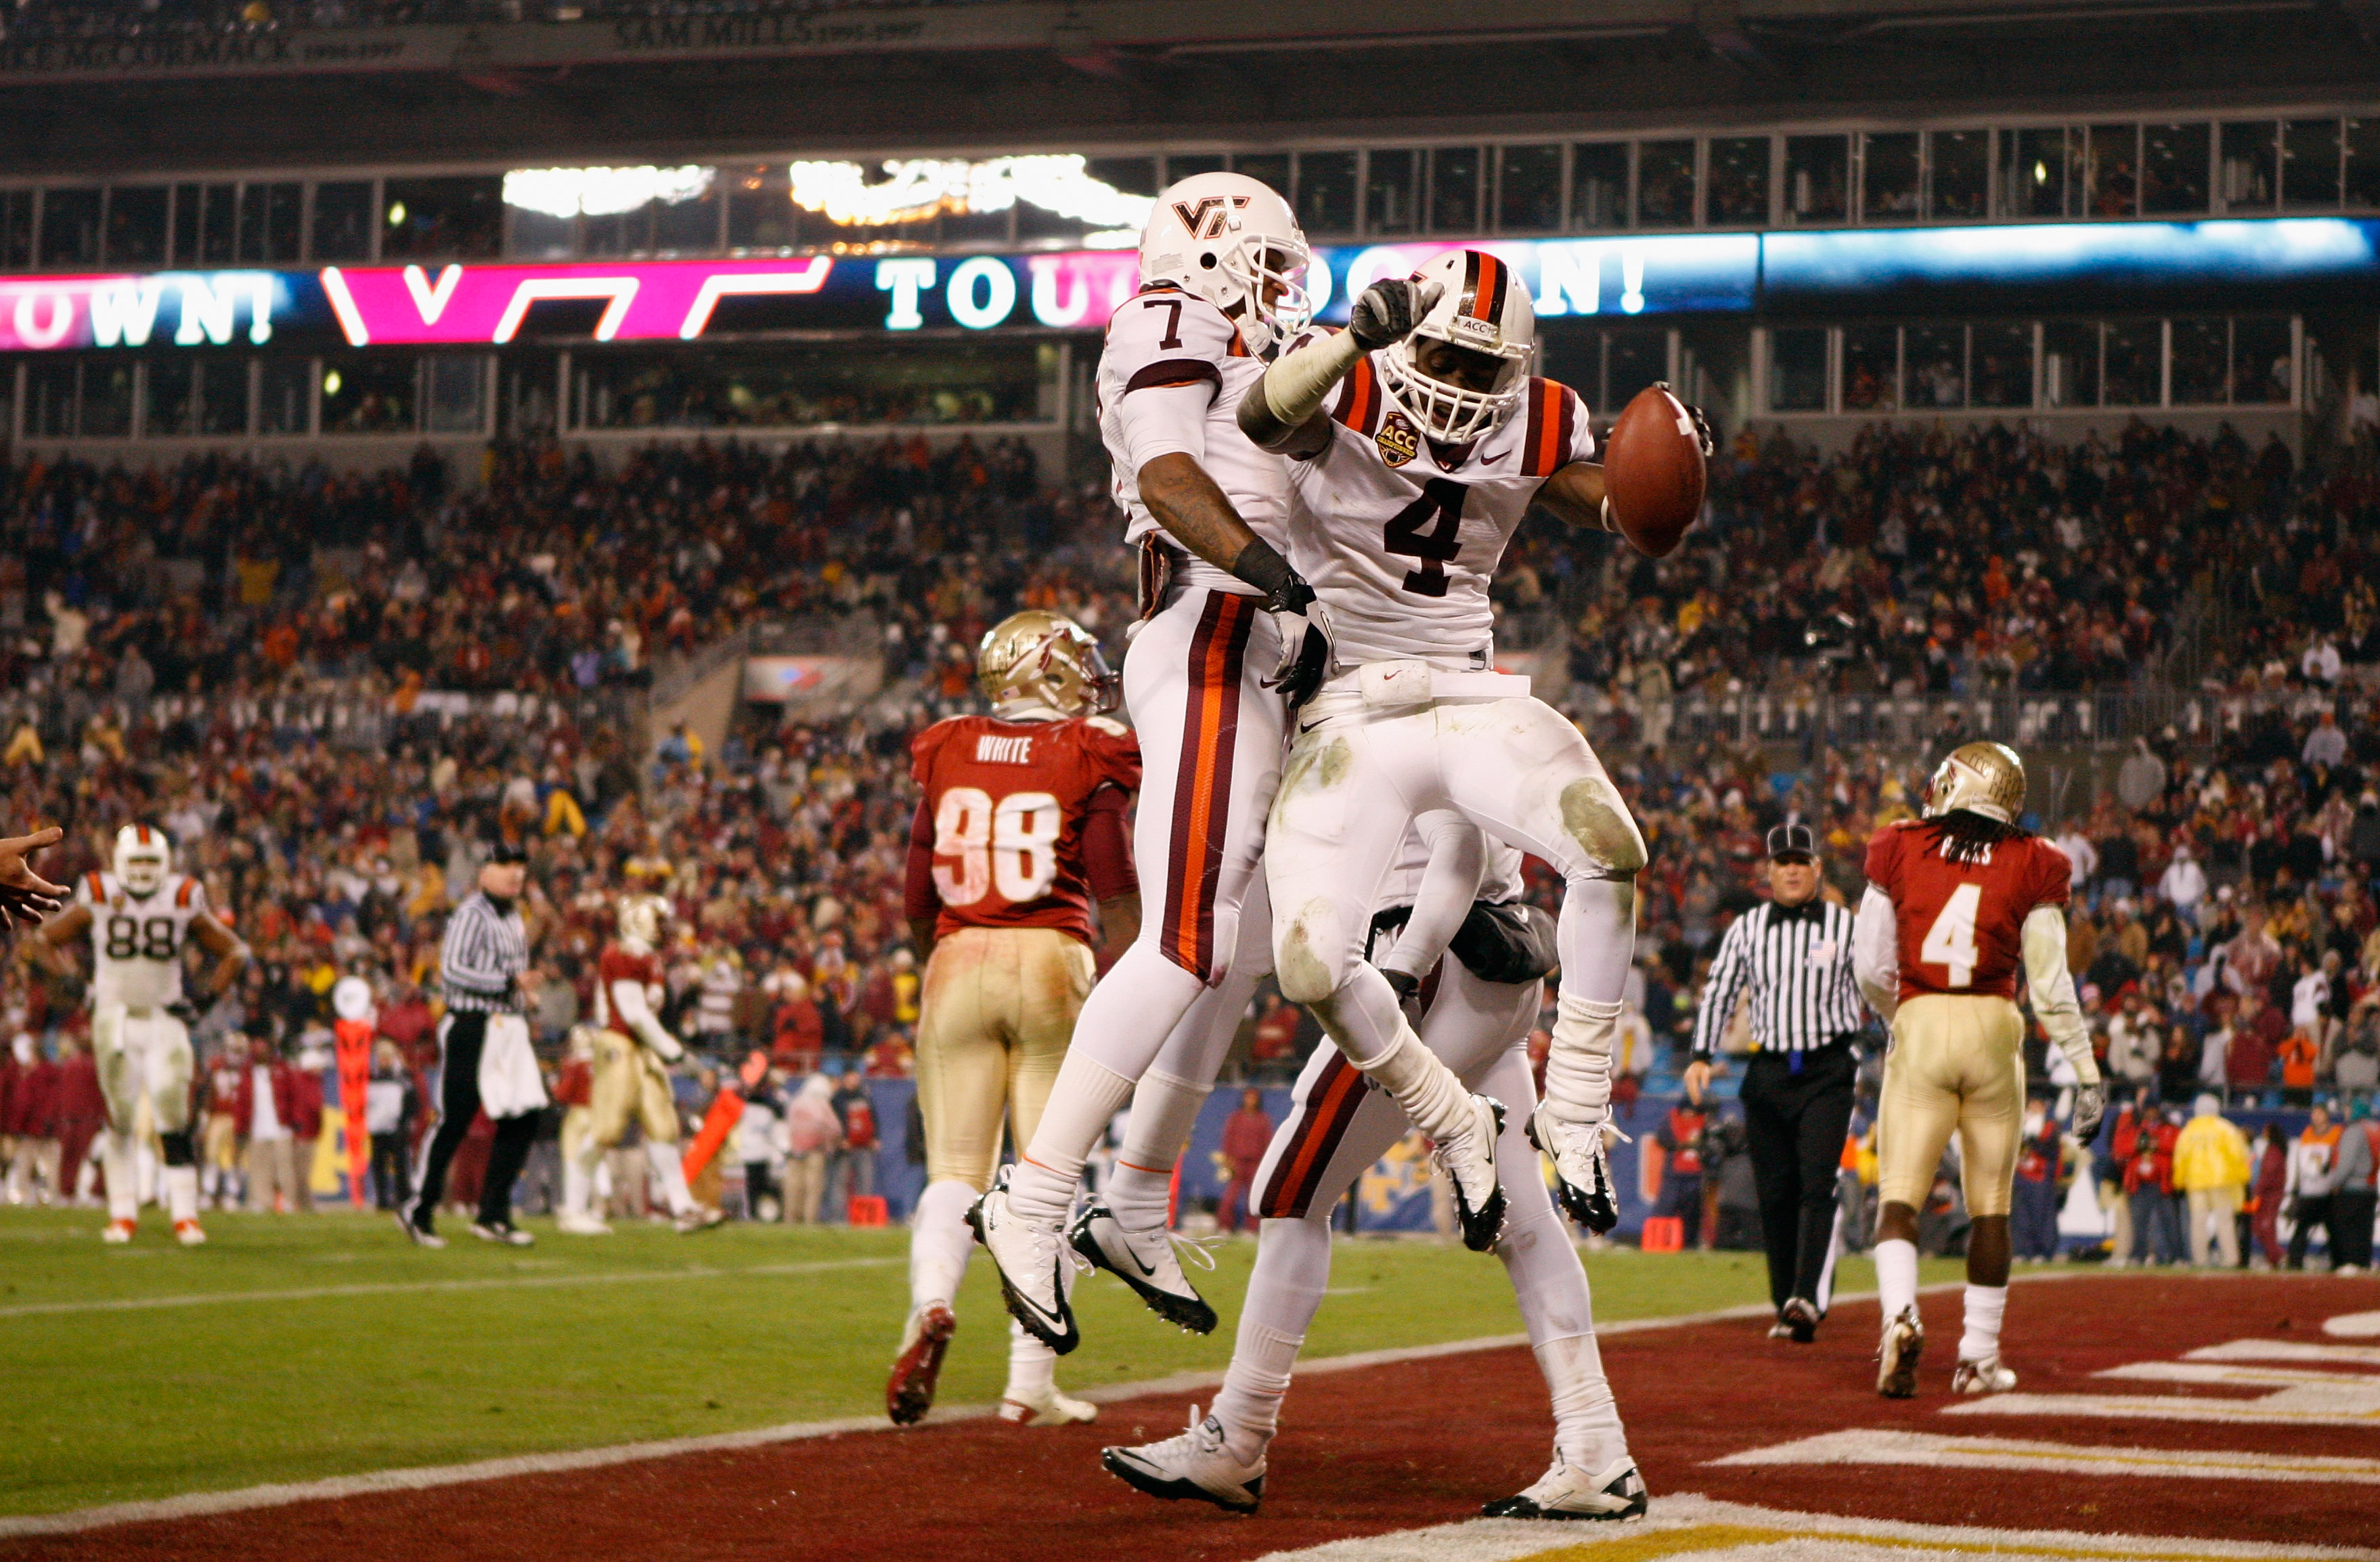 CHARLOTTE, NC - DECEMBER 04:  David Wilson #4 of the Virginia Tech Hokies celebrates after scoring a touchdown with teammate Marcus Davis during their game against the Florida State Seminoles at Bank of America Stadium on December 4, 2010 in Charlotte, No